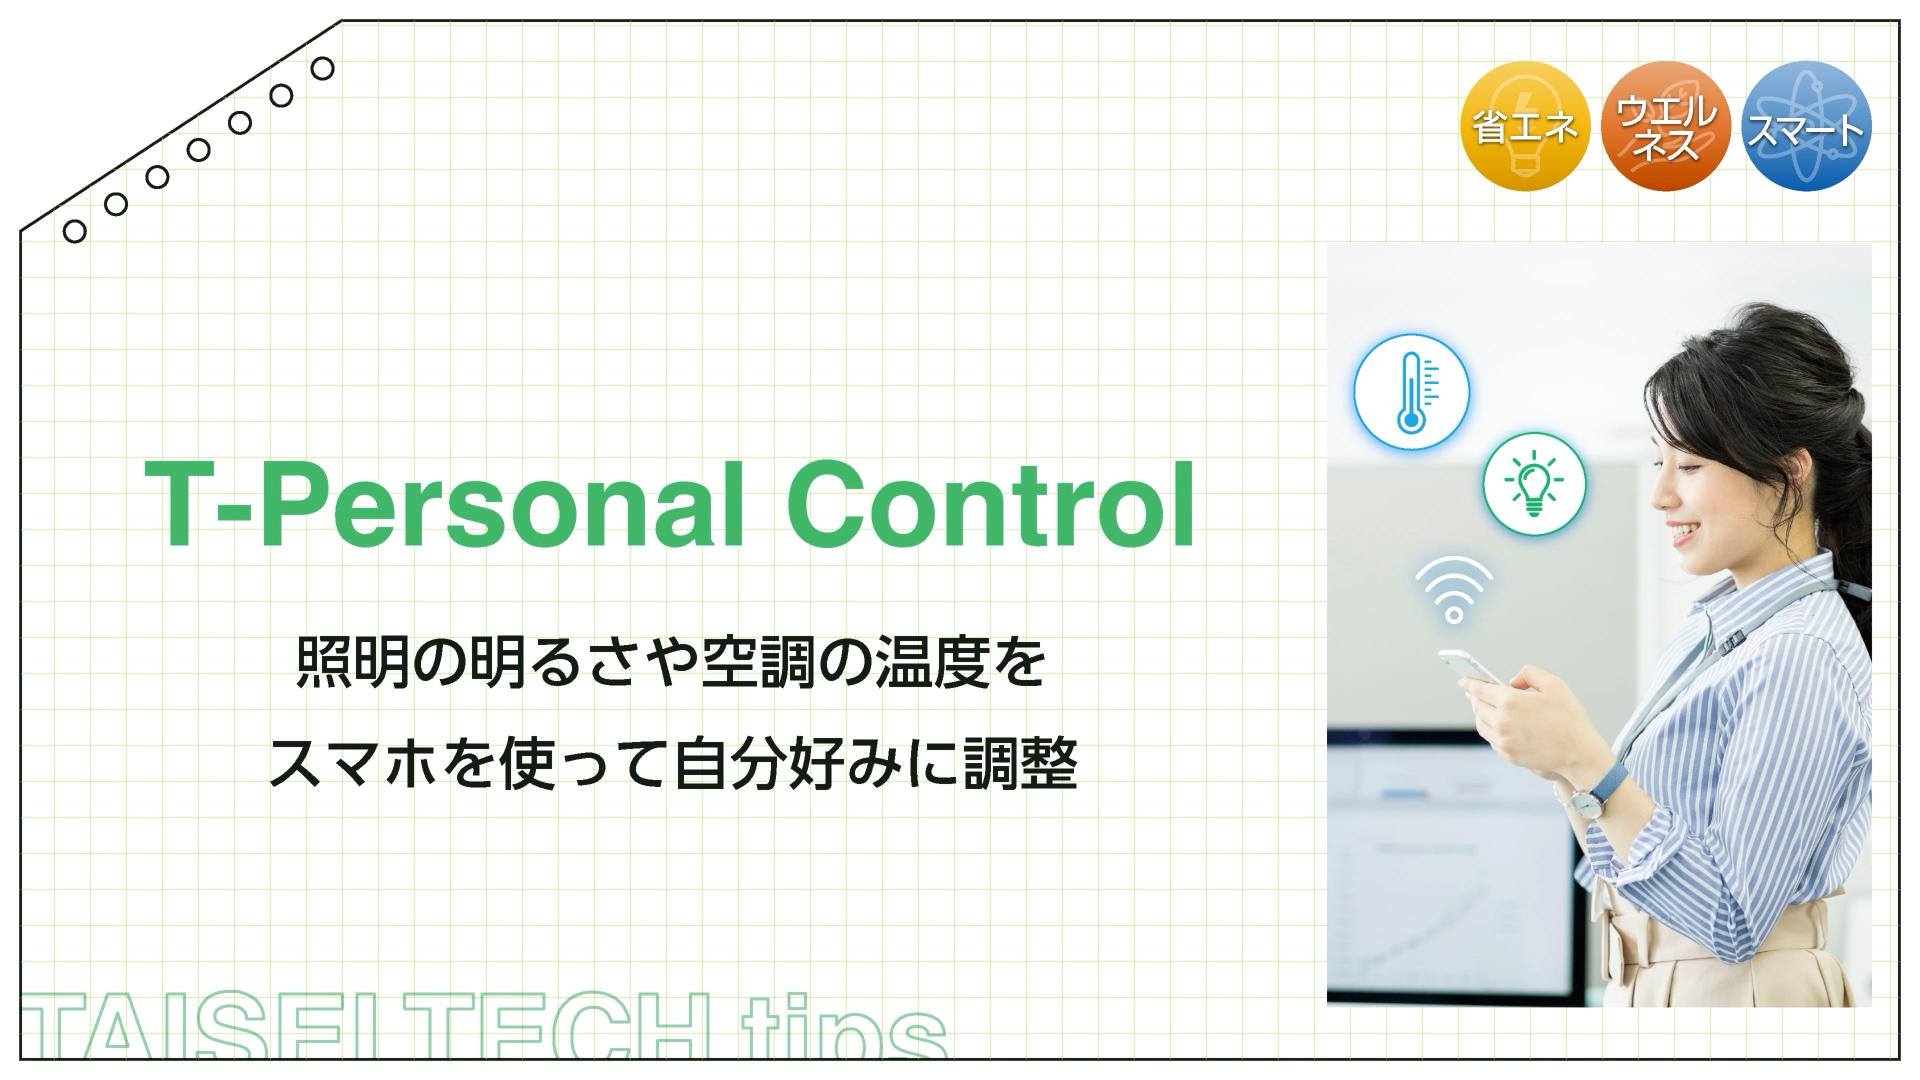 T-Personal Control